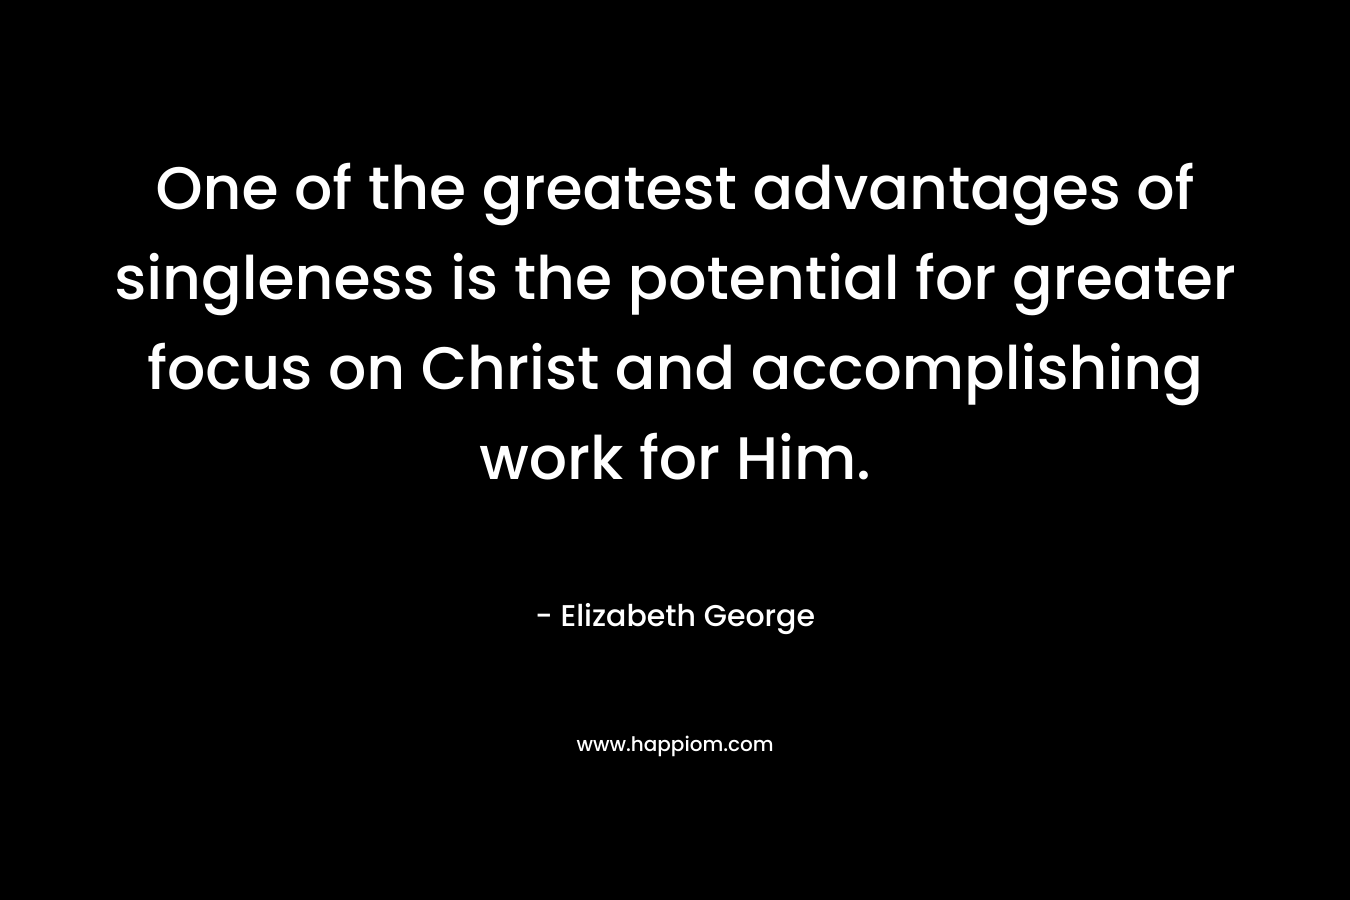 One of the greatest advantages of singleness is the potential for greater focus on Christ and accomplishing work for Him. – Elizabeth George